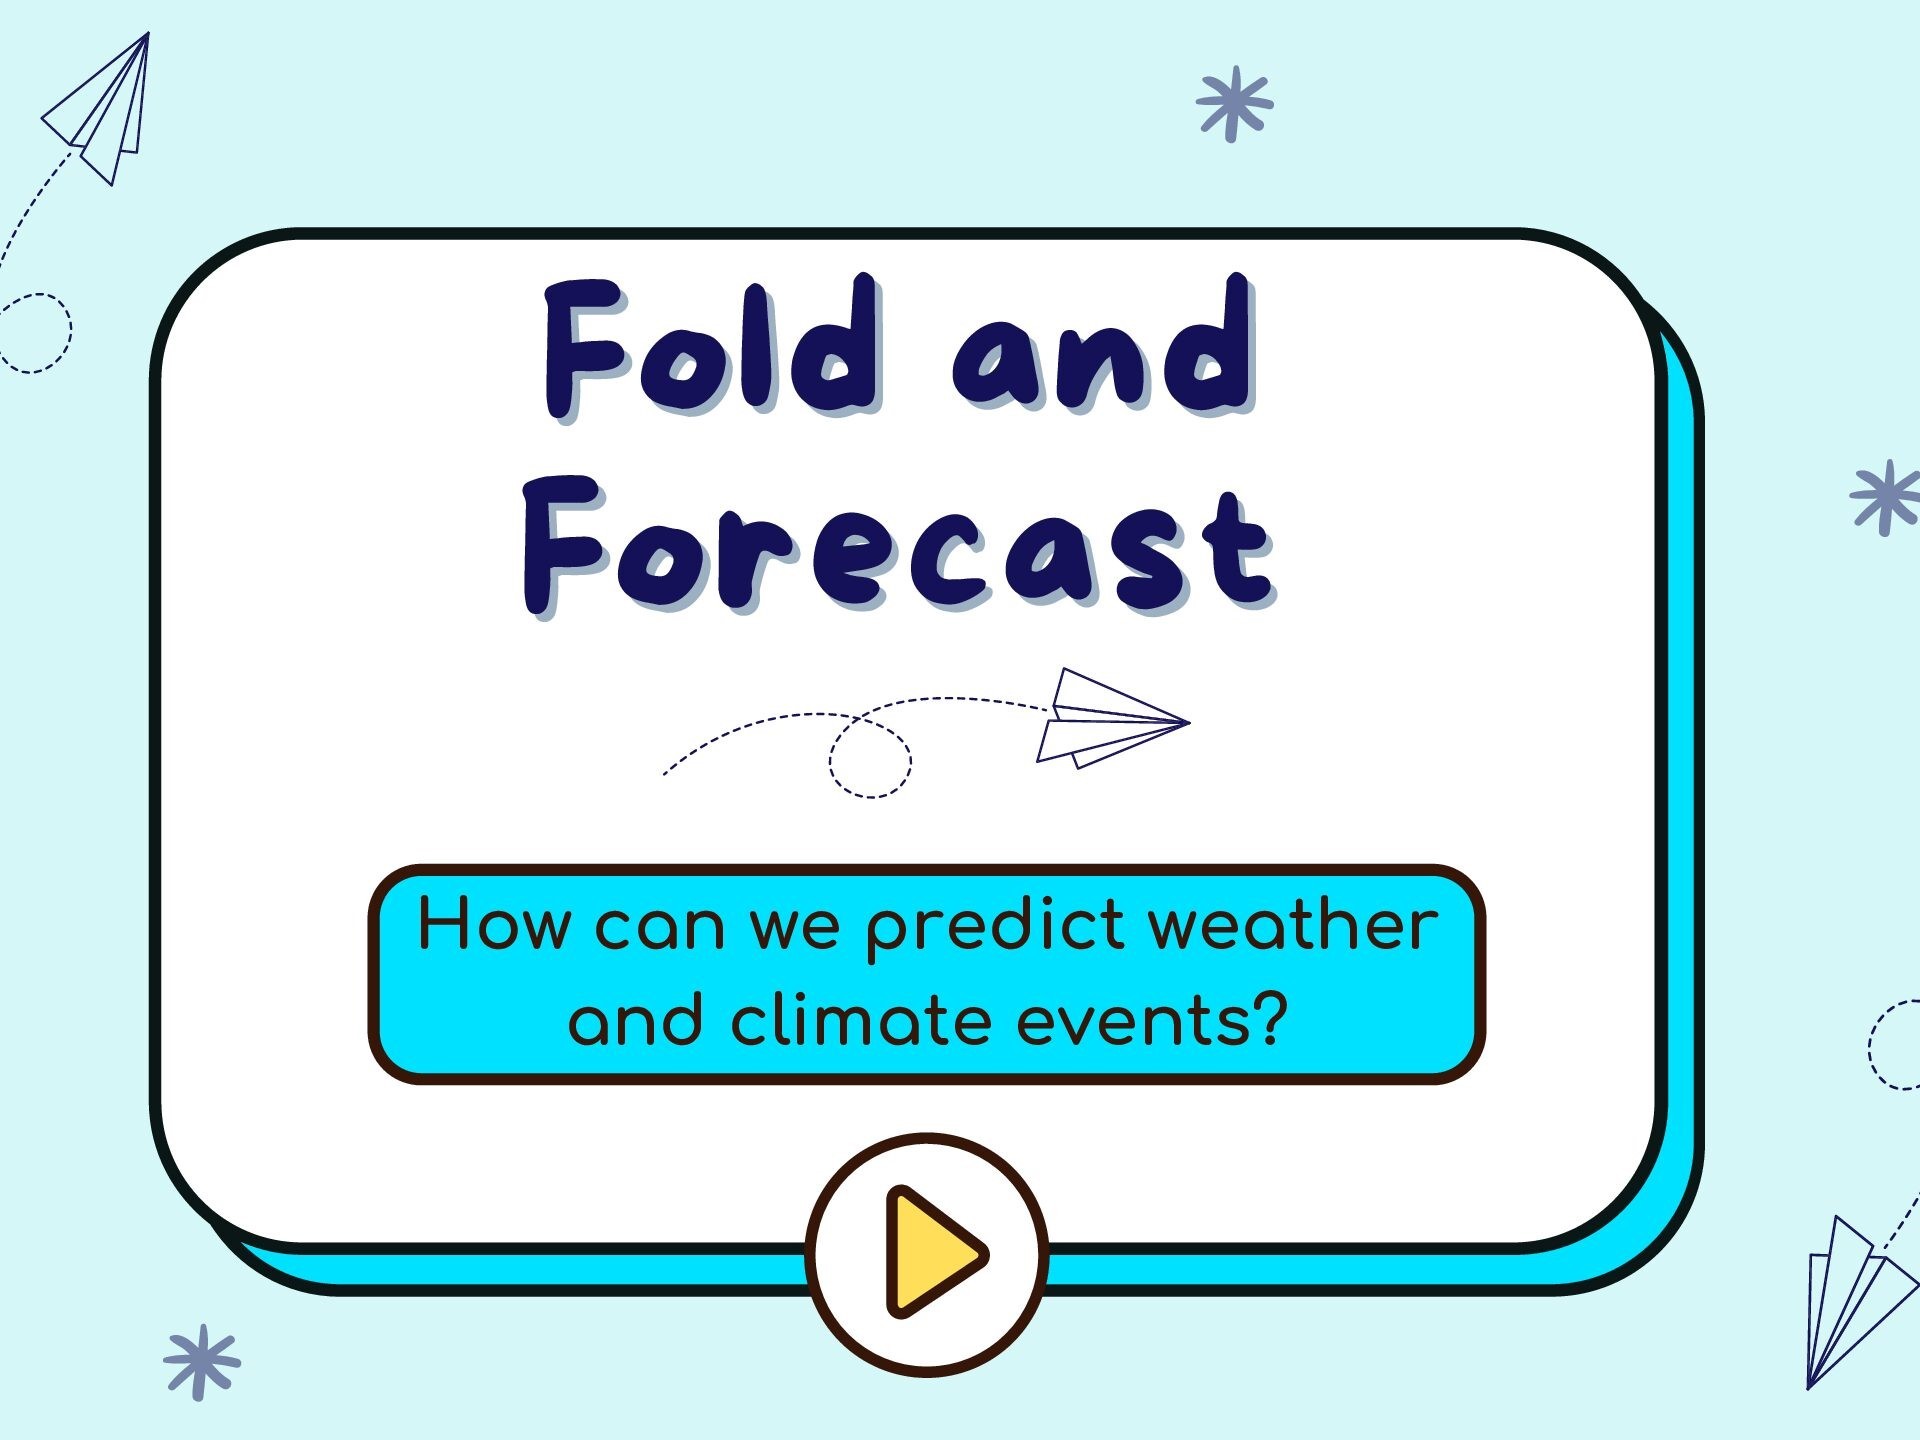 Fold and Forecast: How can we predict weather and climate events?